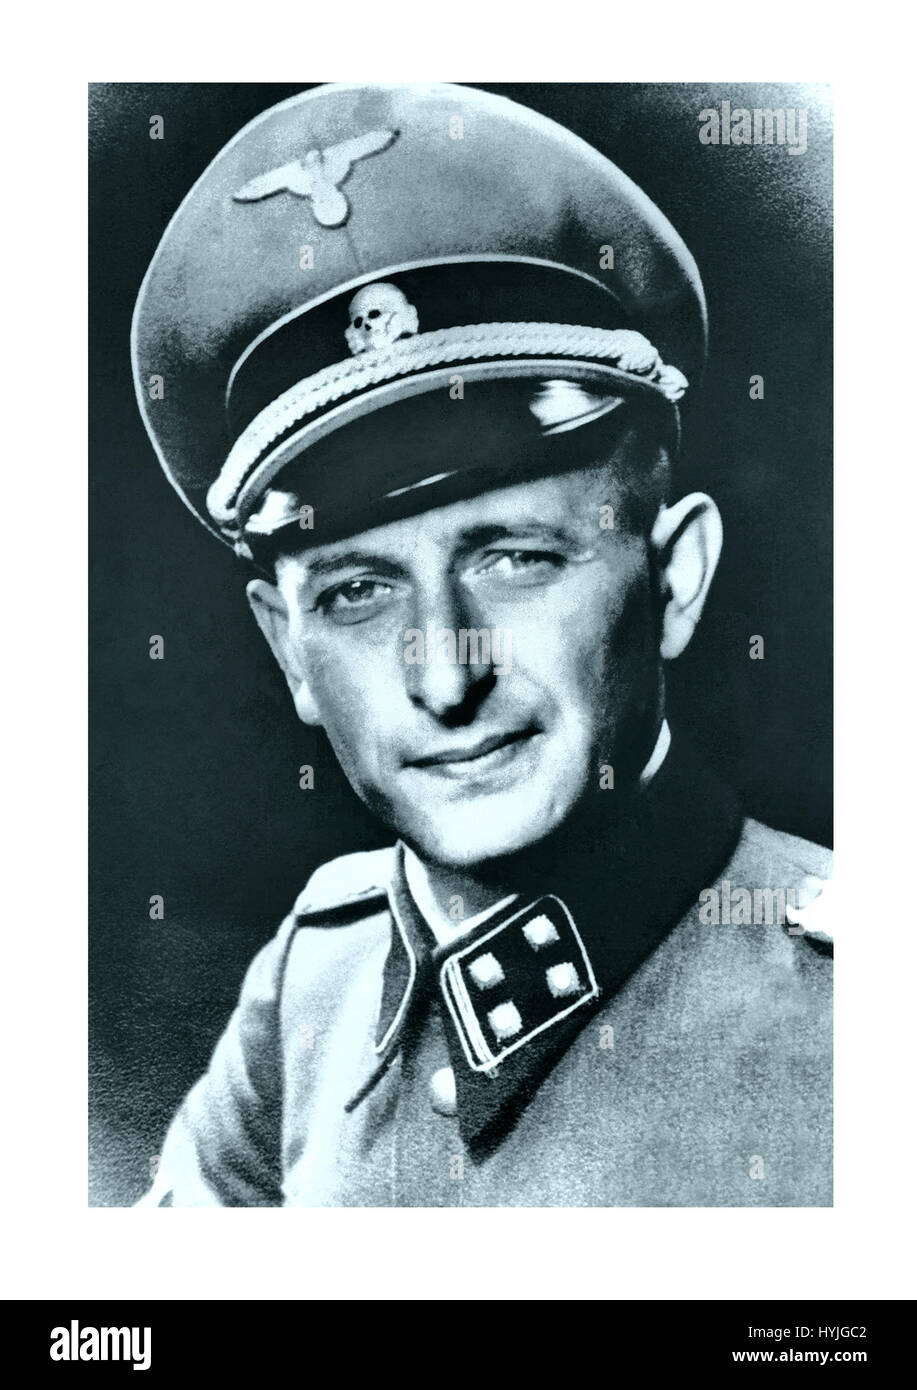 ADOLF EICHMANN Portrait of infamous Adolf Eichmann- Nazi SS Obersturmbannführer (convicted & sentenced to death war criminal who played a major part in the Holocaust) wearing a military cap with SS deaths head insignia and uniform Stock Photo